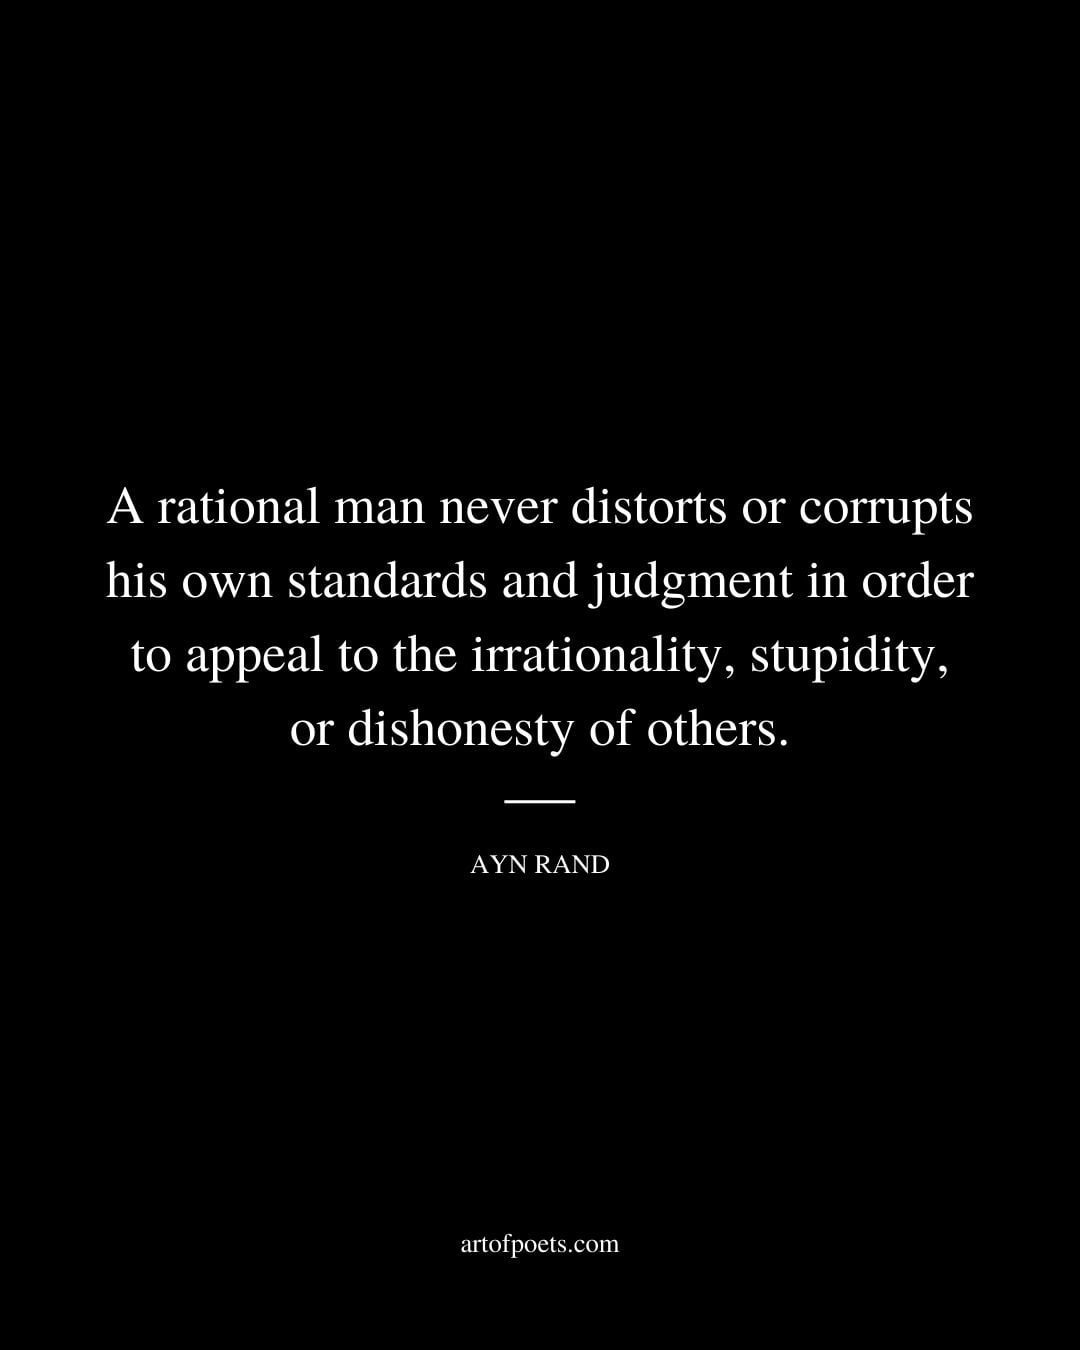 A rational man never distorts or corrupts his own standards and judgment in order to appeal to the irrationality stupidity or dishonesty of others